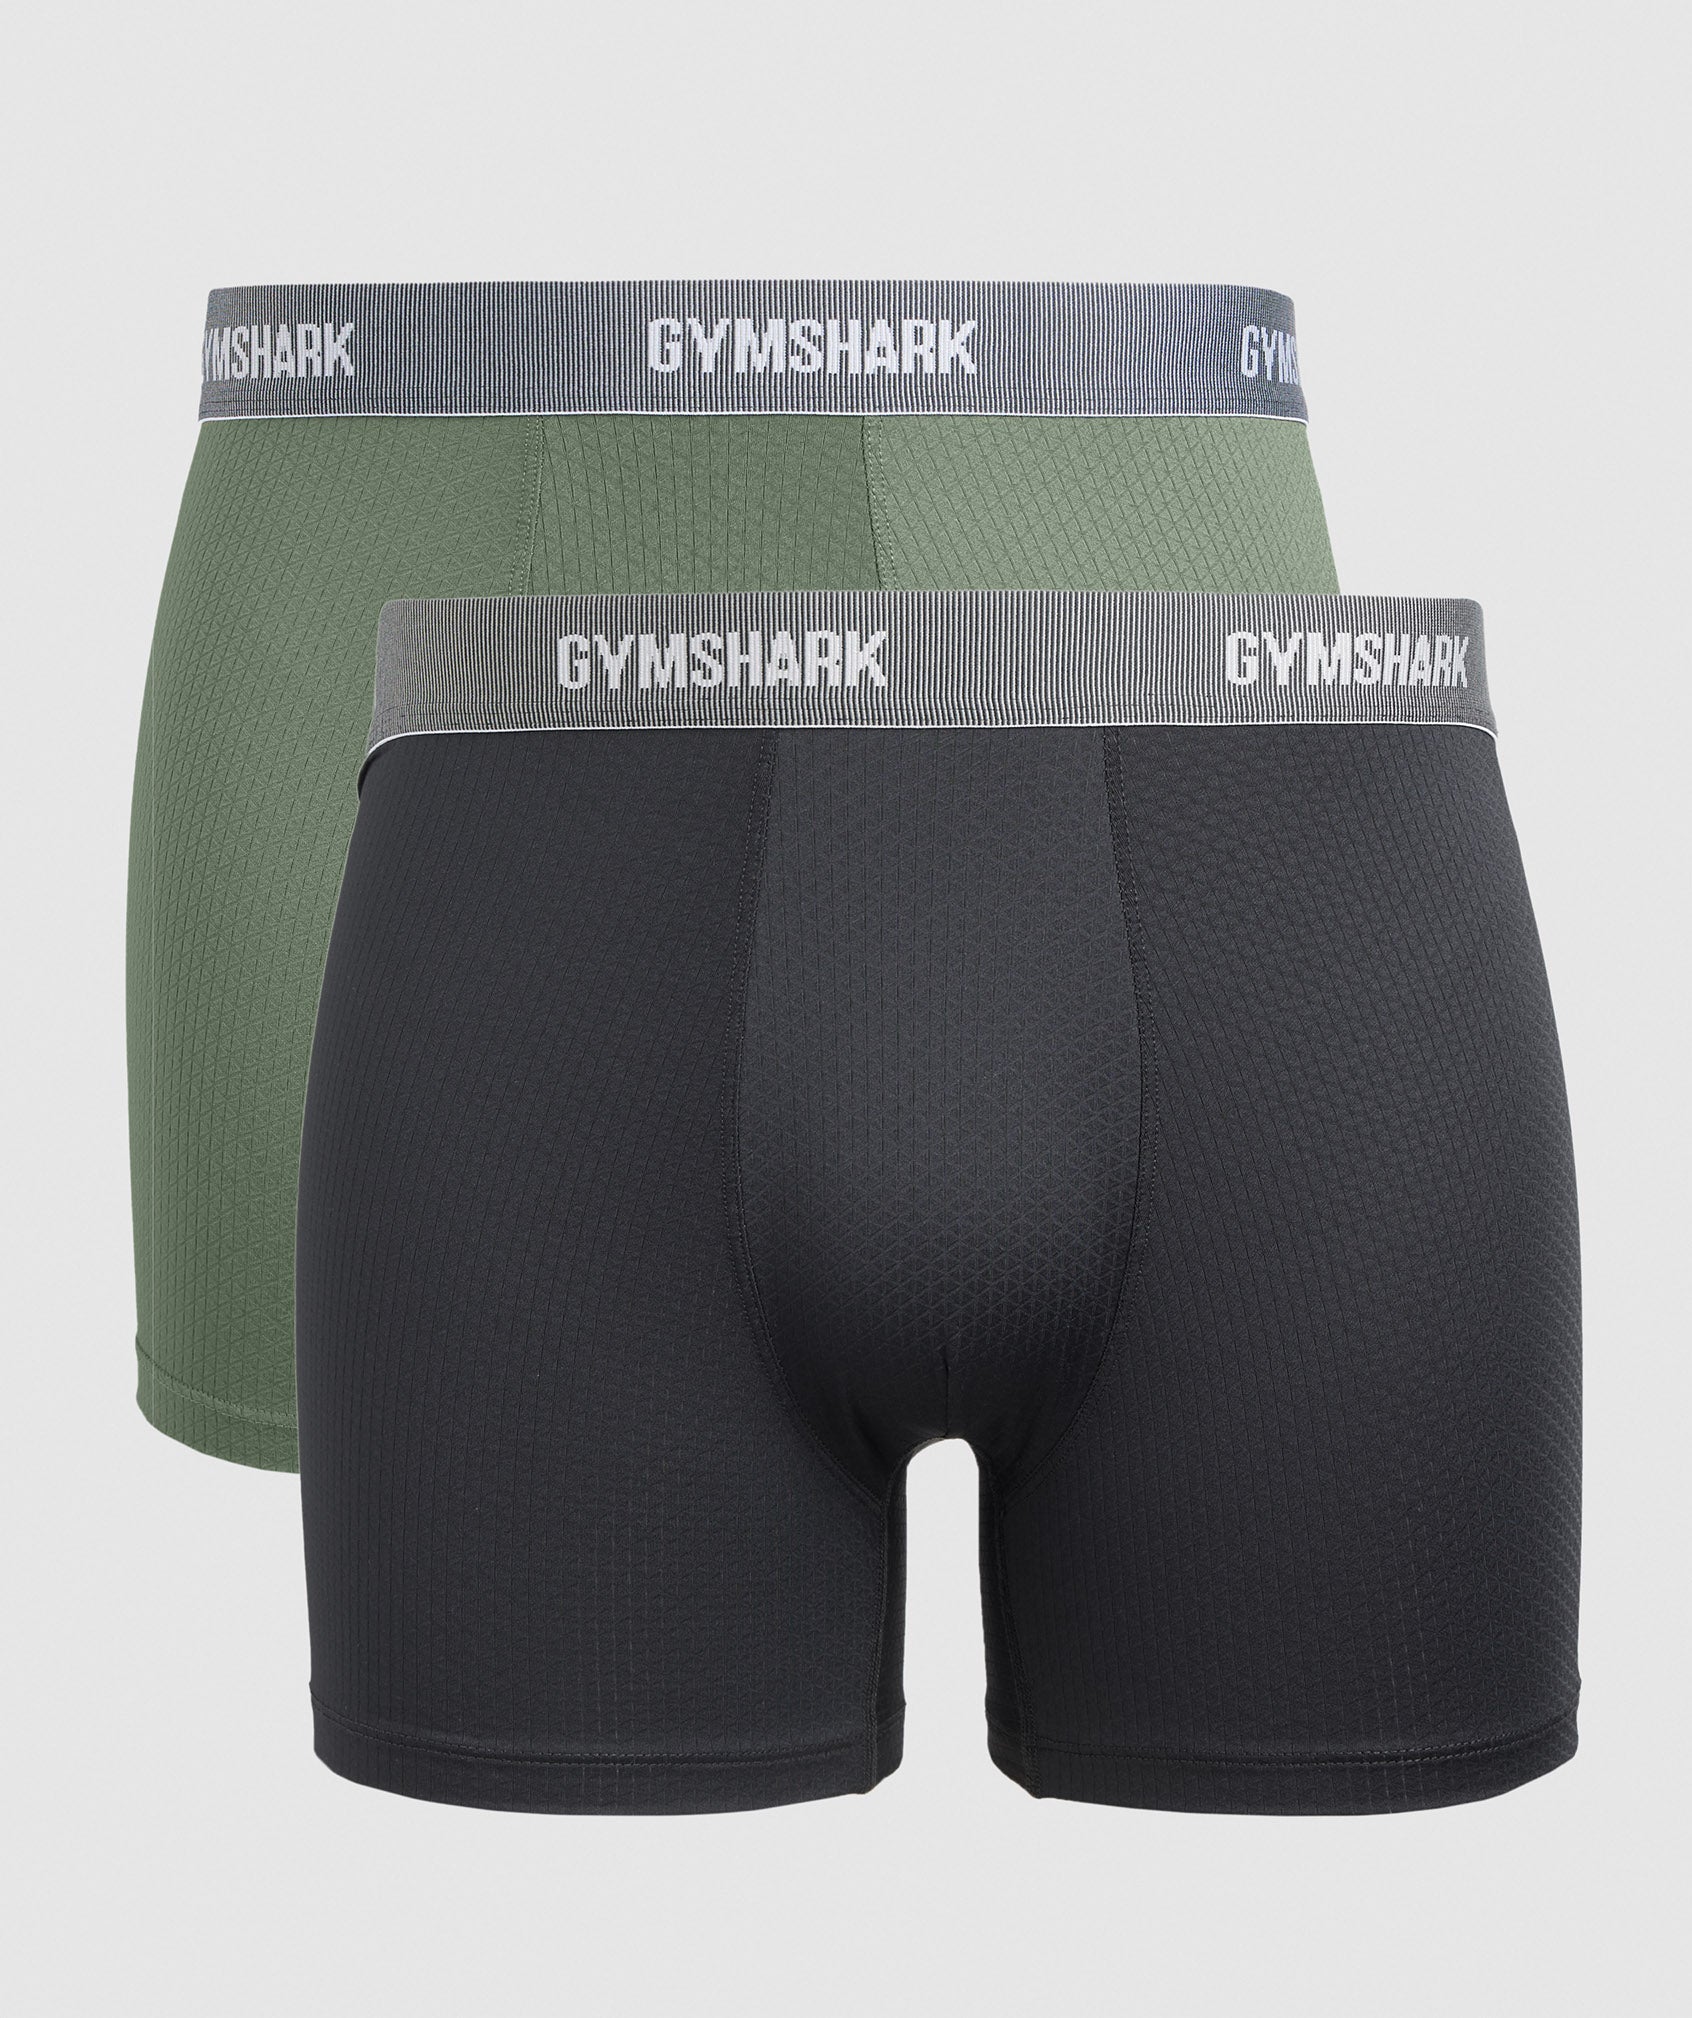 Sports Tech Boxers 2pk in Black/Core Olive - view 1